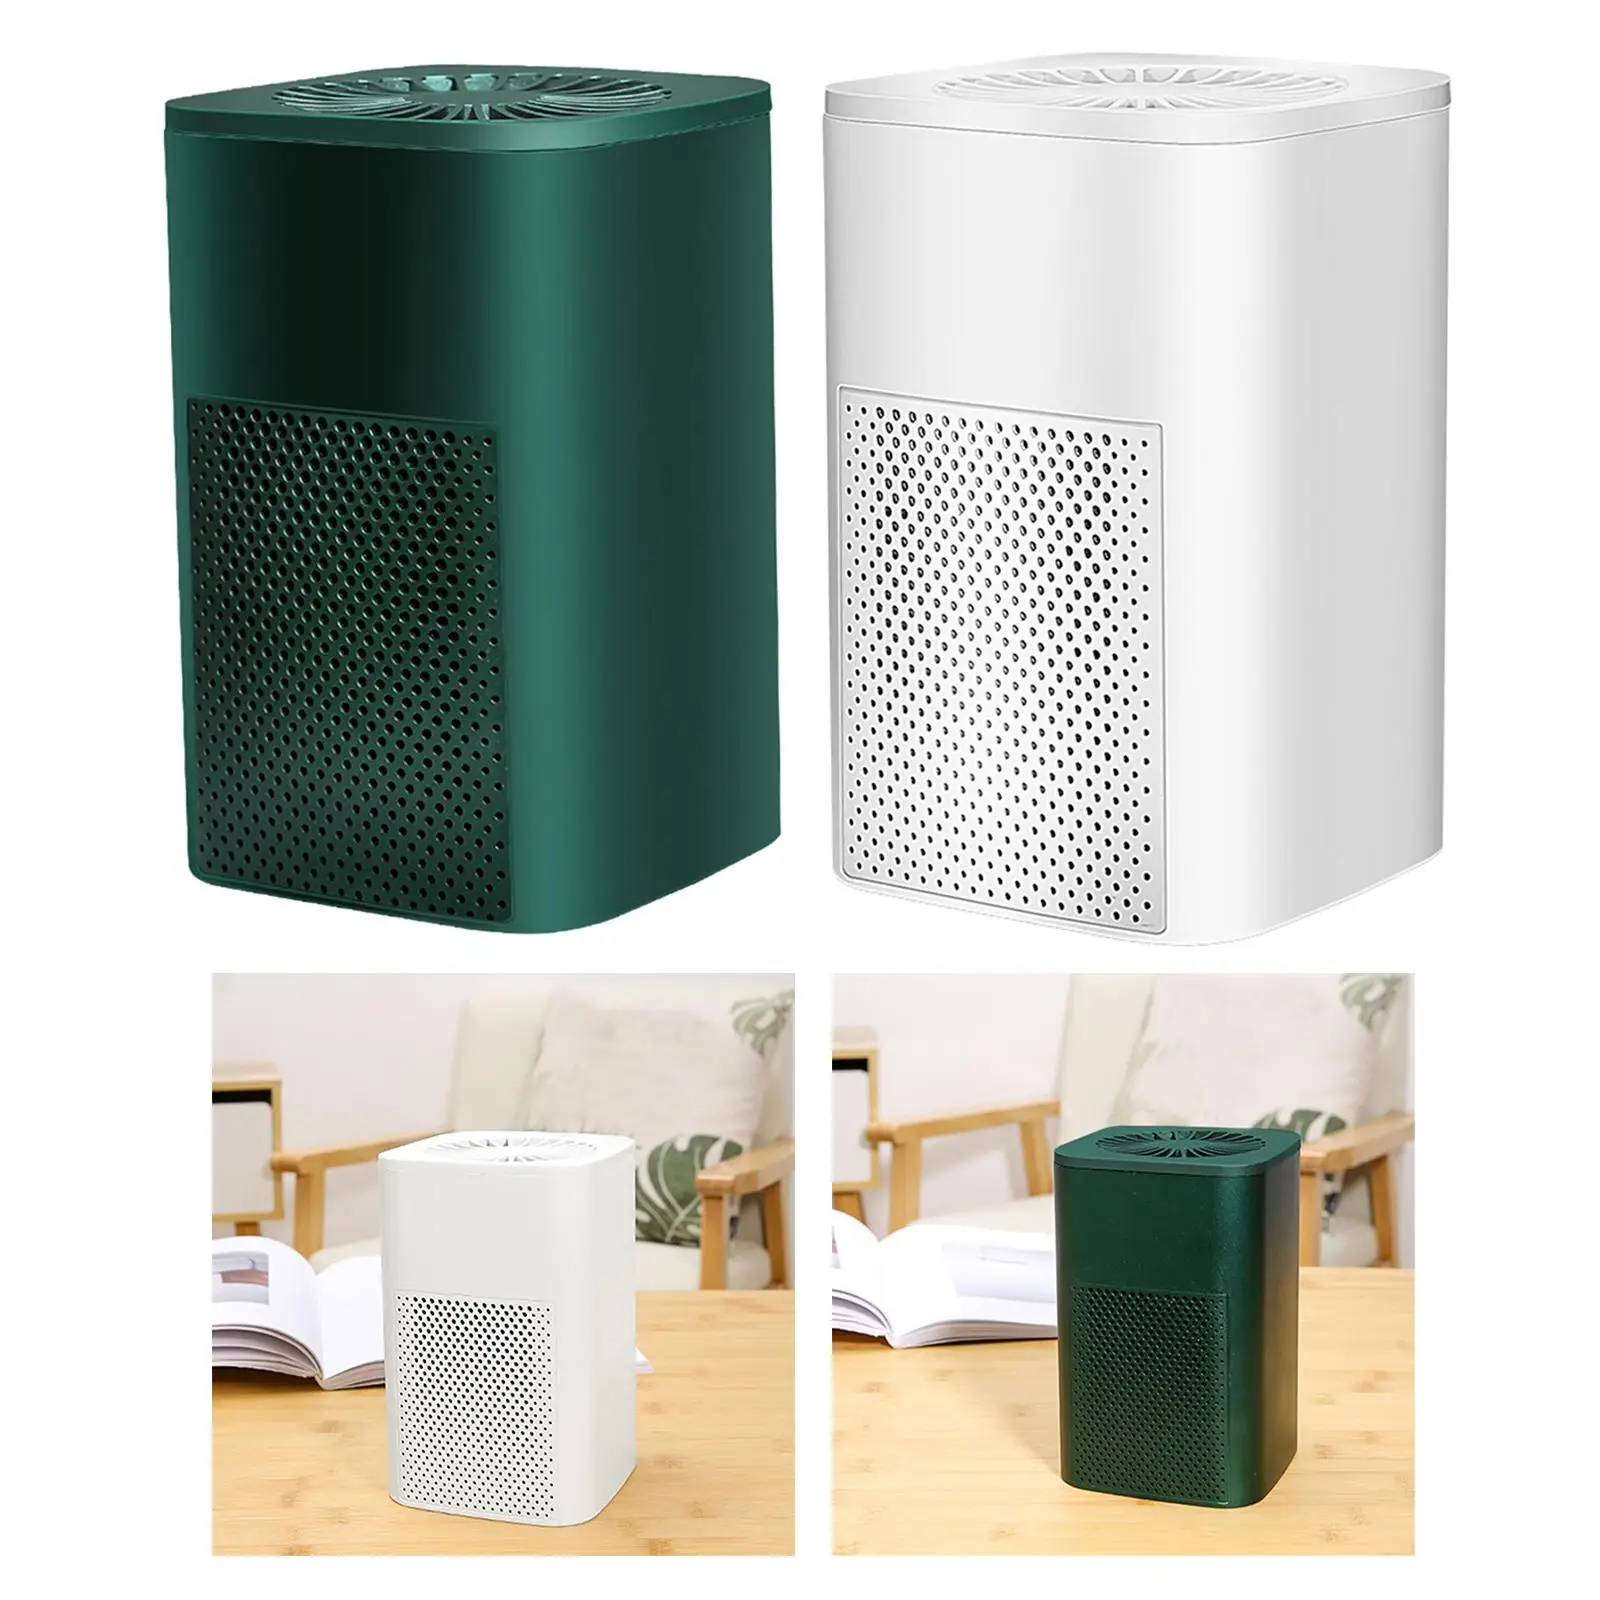 Mini Air Purifier PM2.5 Monitor 35dB Quiet Office 2 Layer Activated Carbon Travel Air Cleaner Removes Odor Dust Particles Pollen